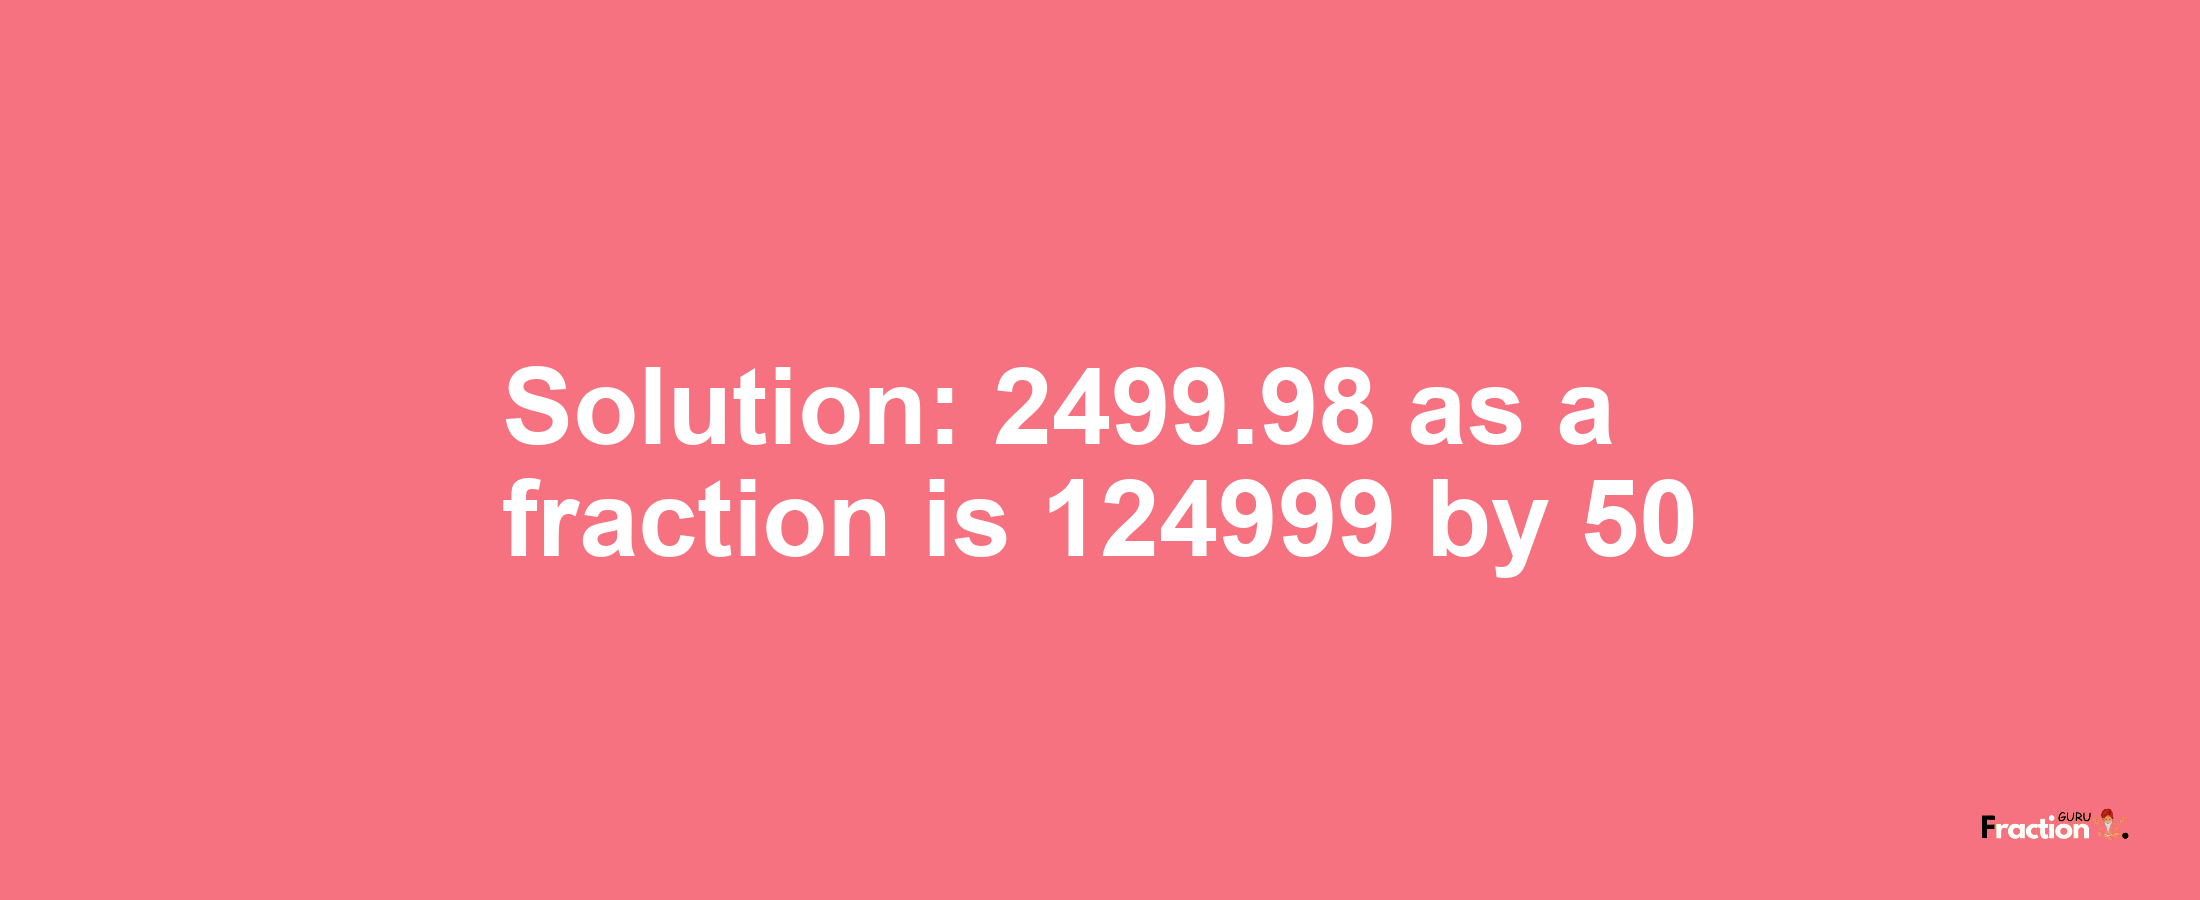 Solution:2499.98 as a fraction is 124999/50